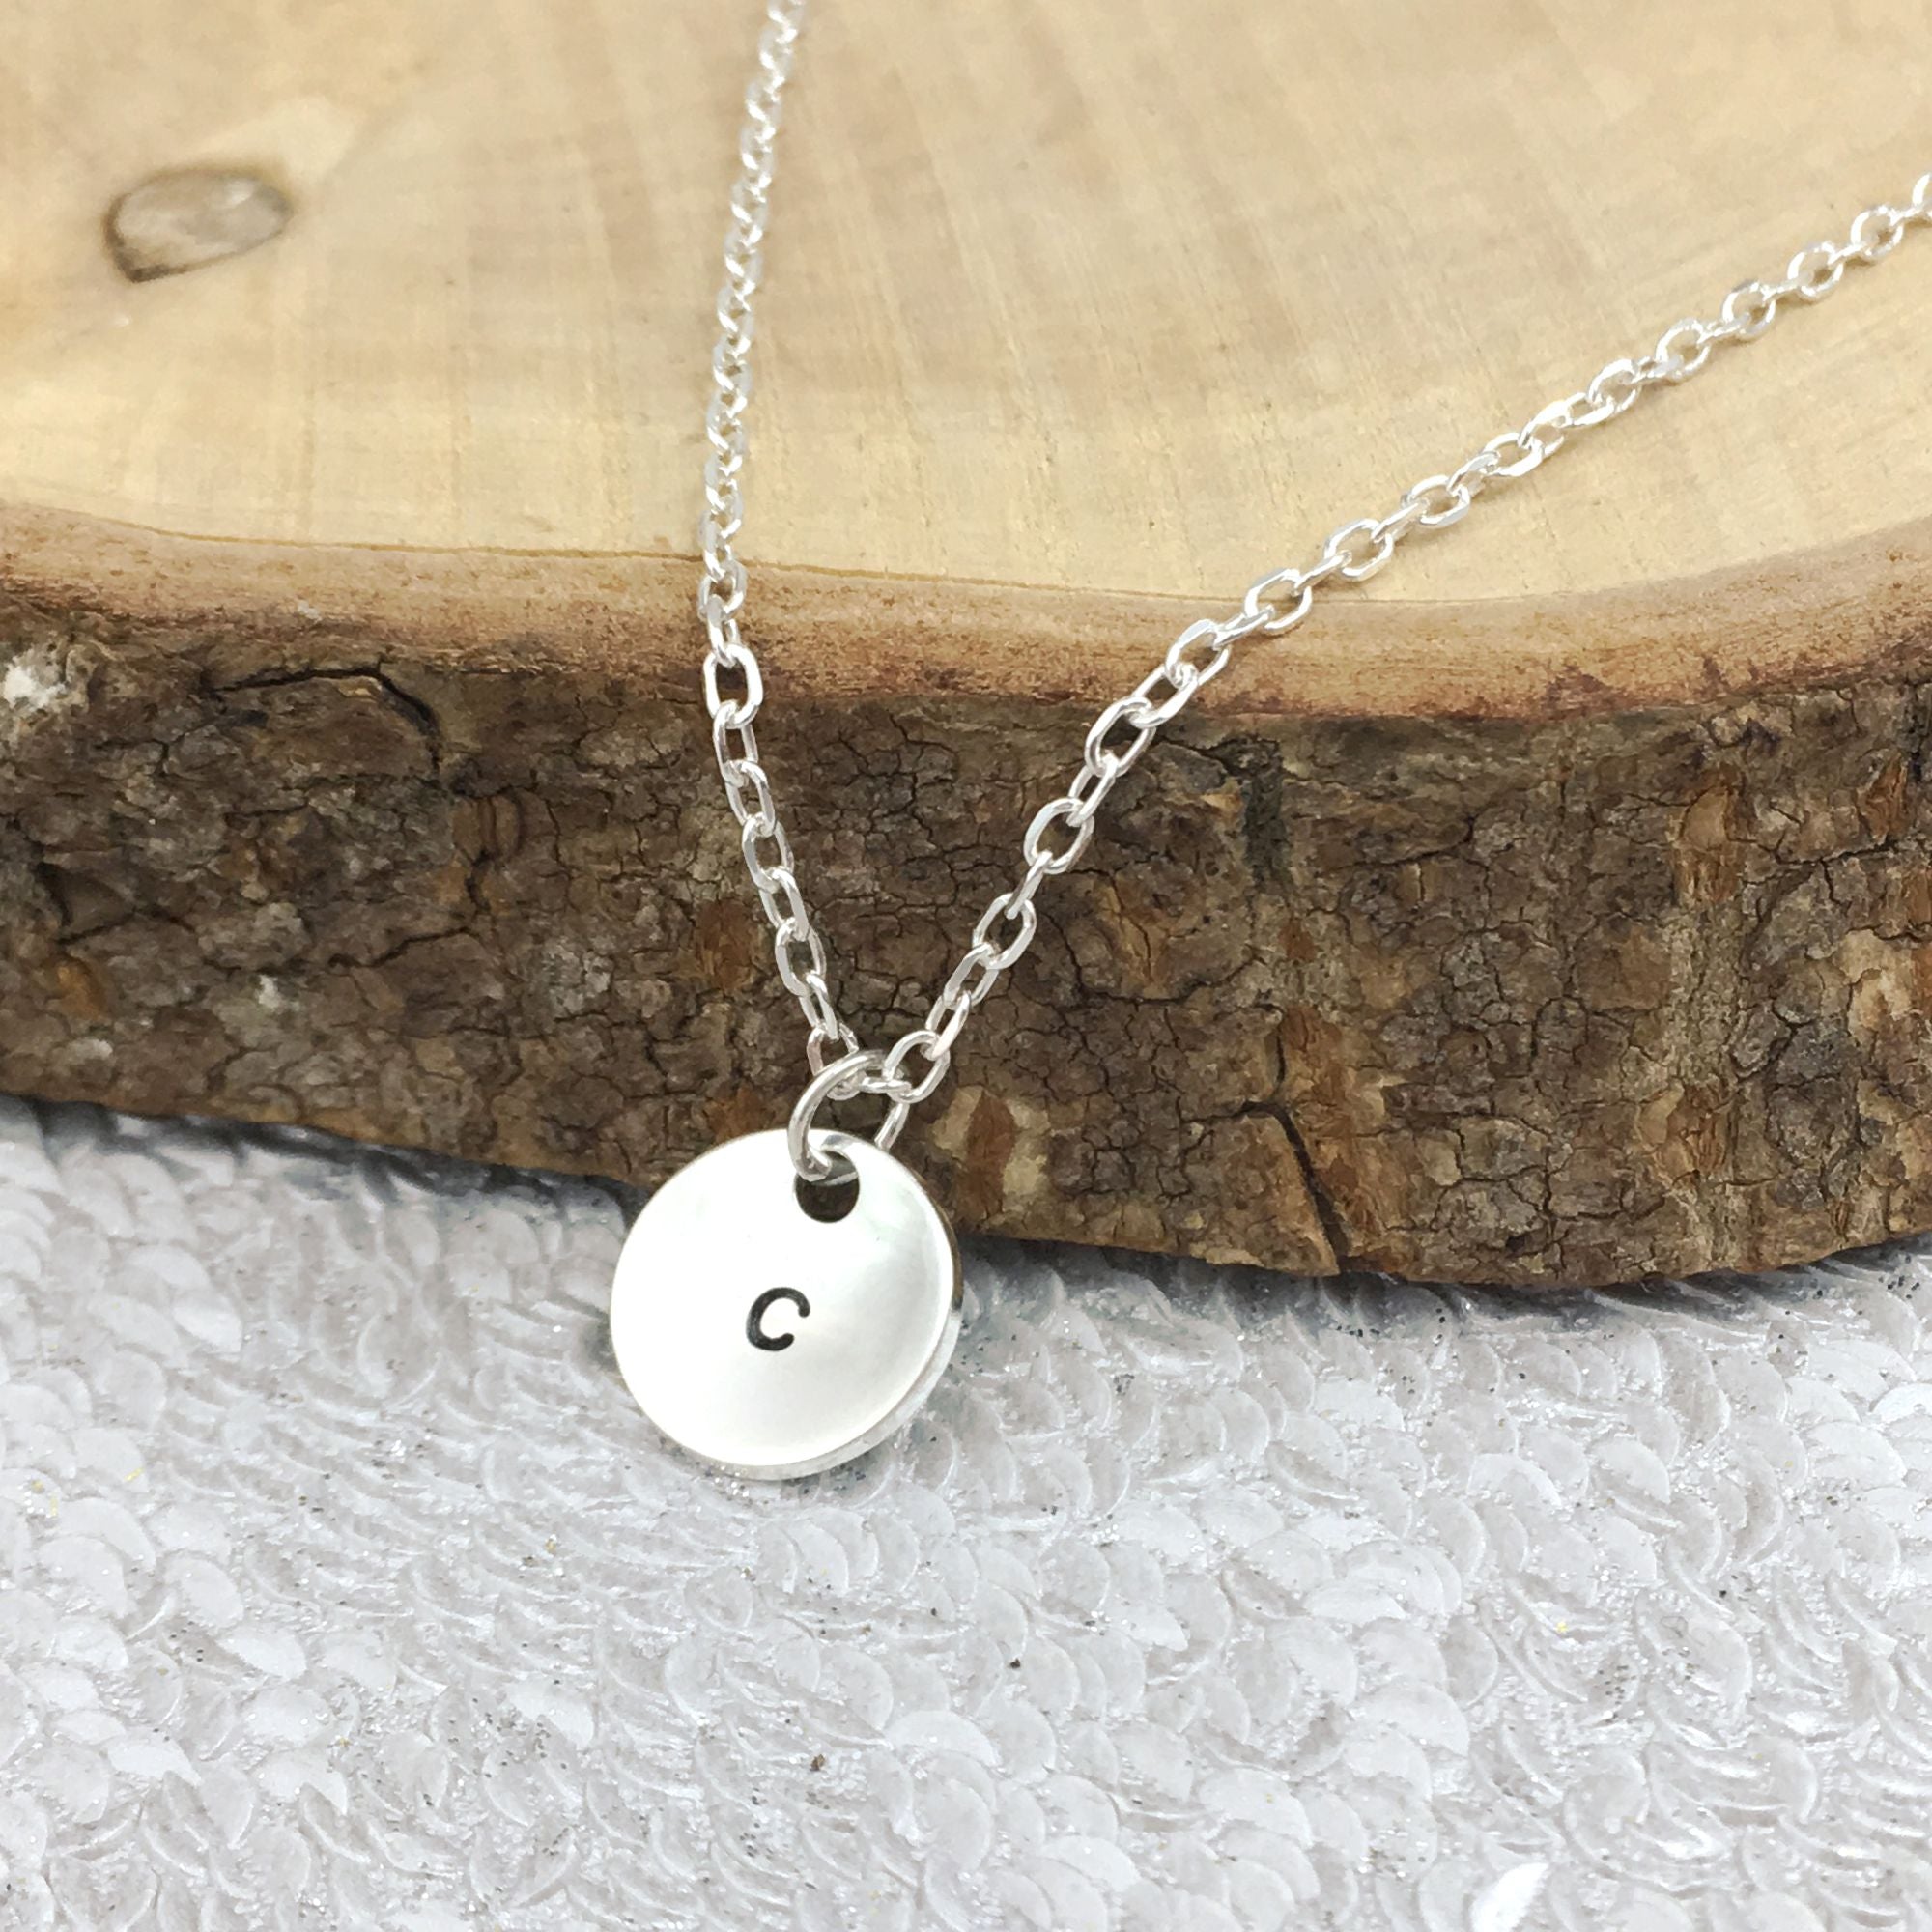 personalised initials necklace wedding bridesmaid gift